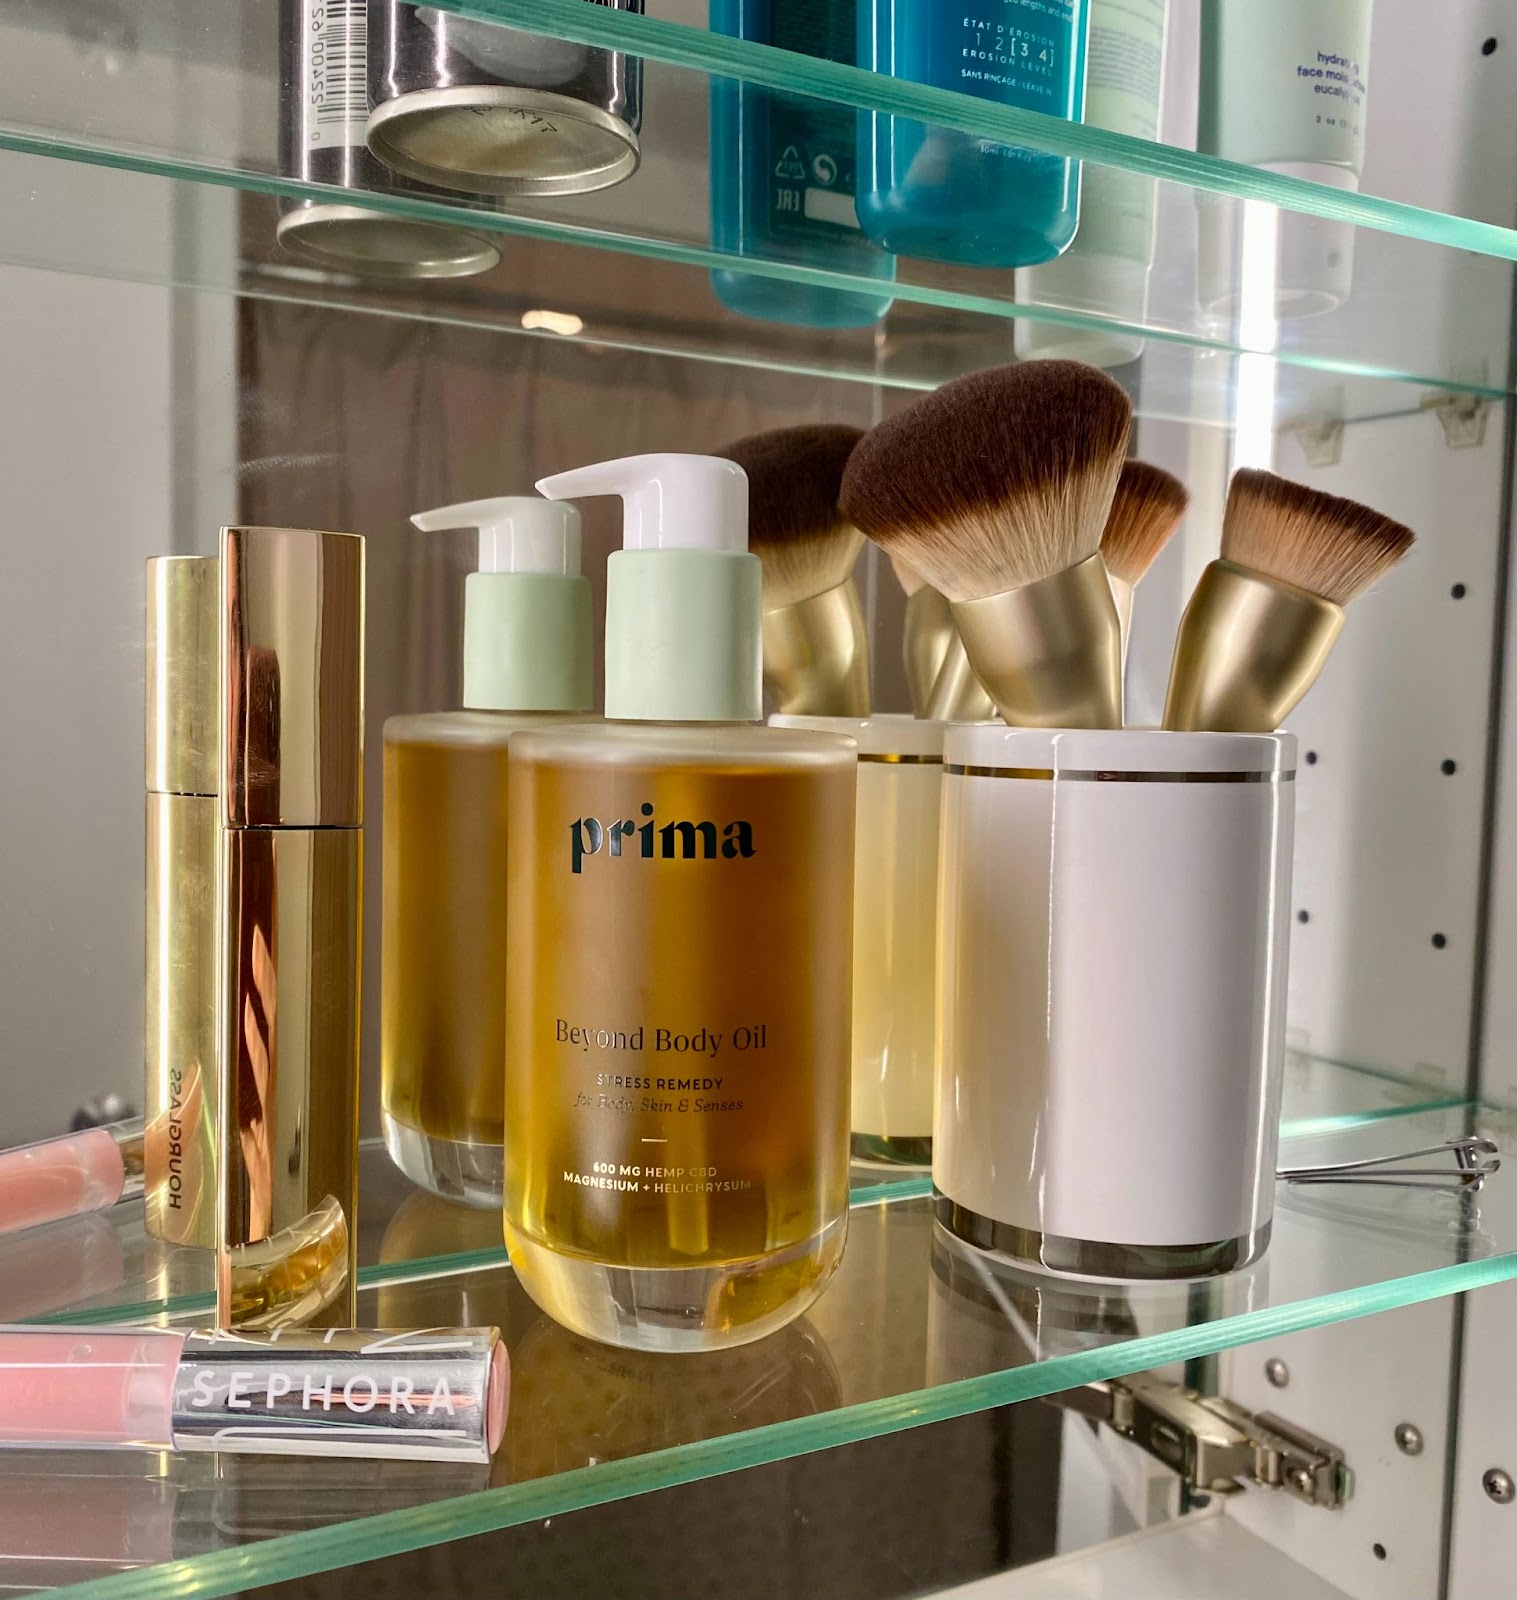 Prima’s Beyond Body Oil Is The Only Stress-Relieving, Skin-Nourishing “Hack” You Need.